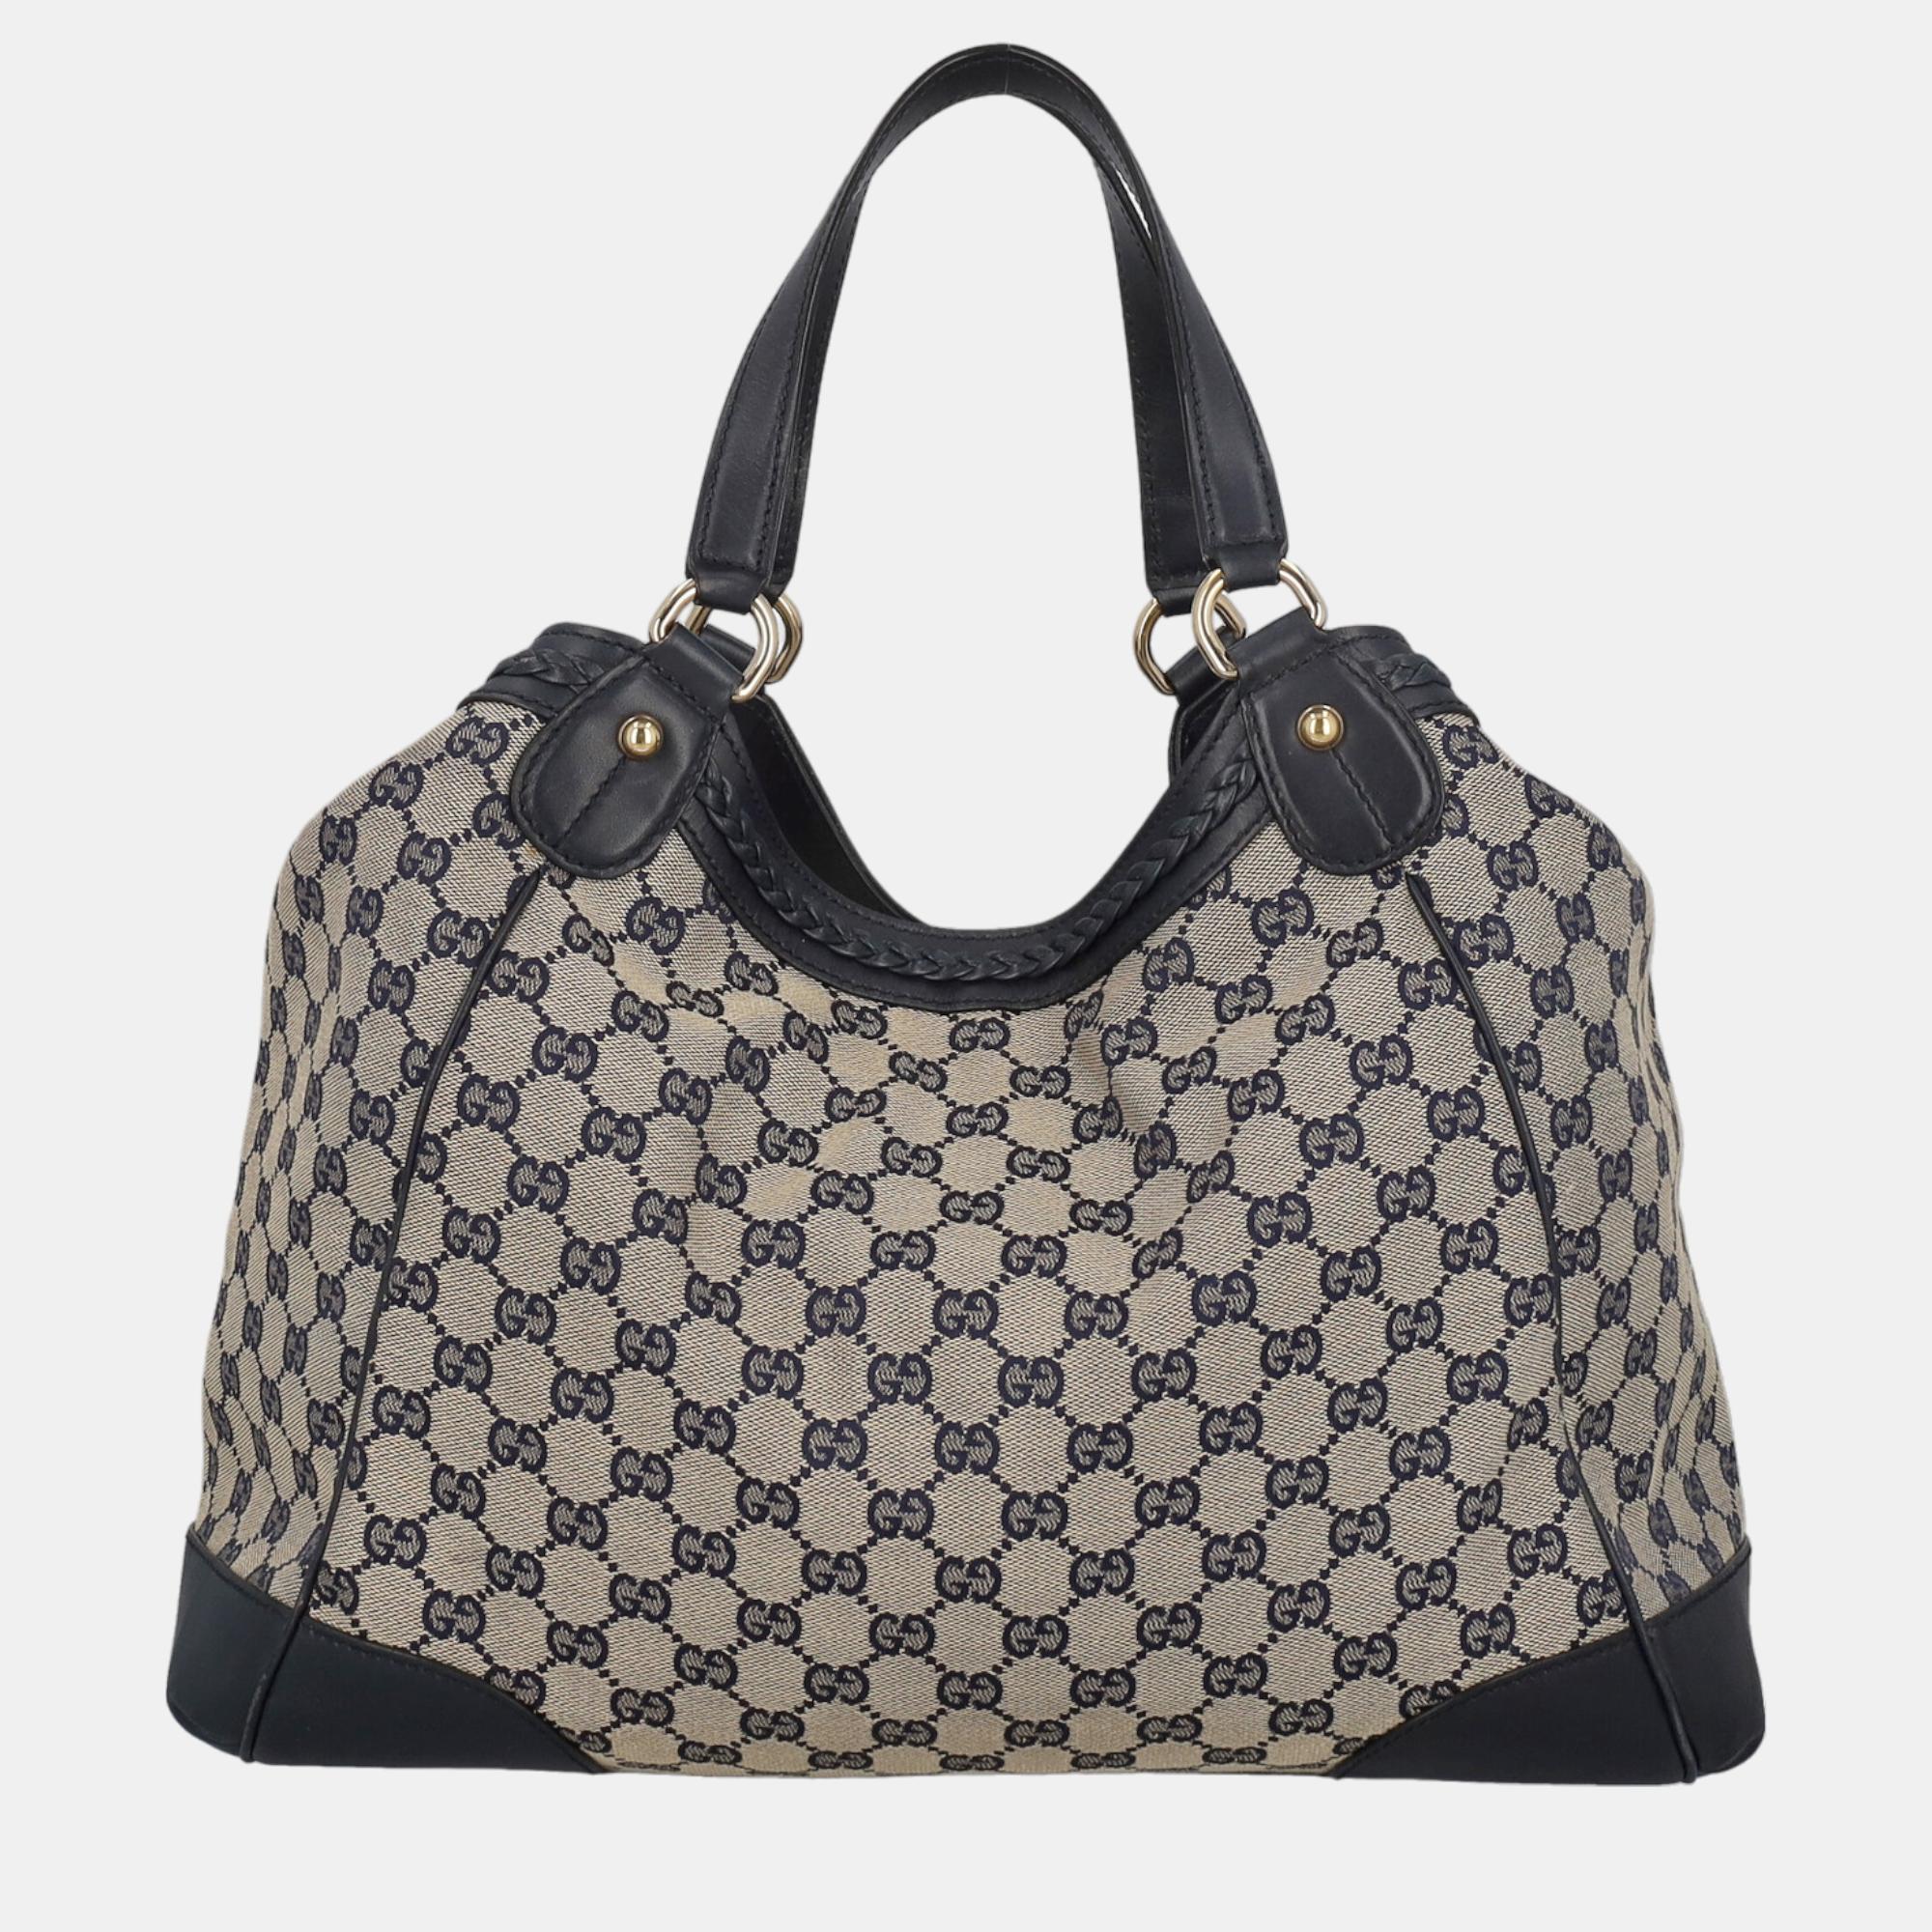 Gucci  Women's Fabric Tote Bag - Beige - One Size